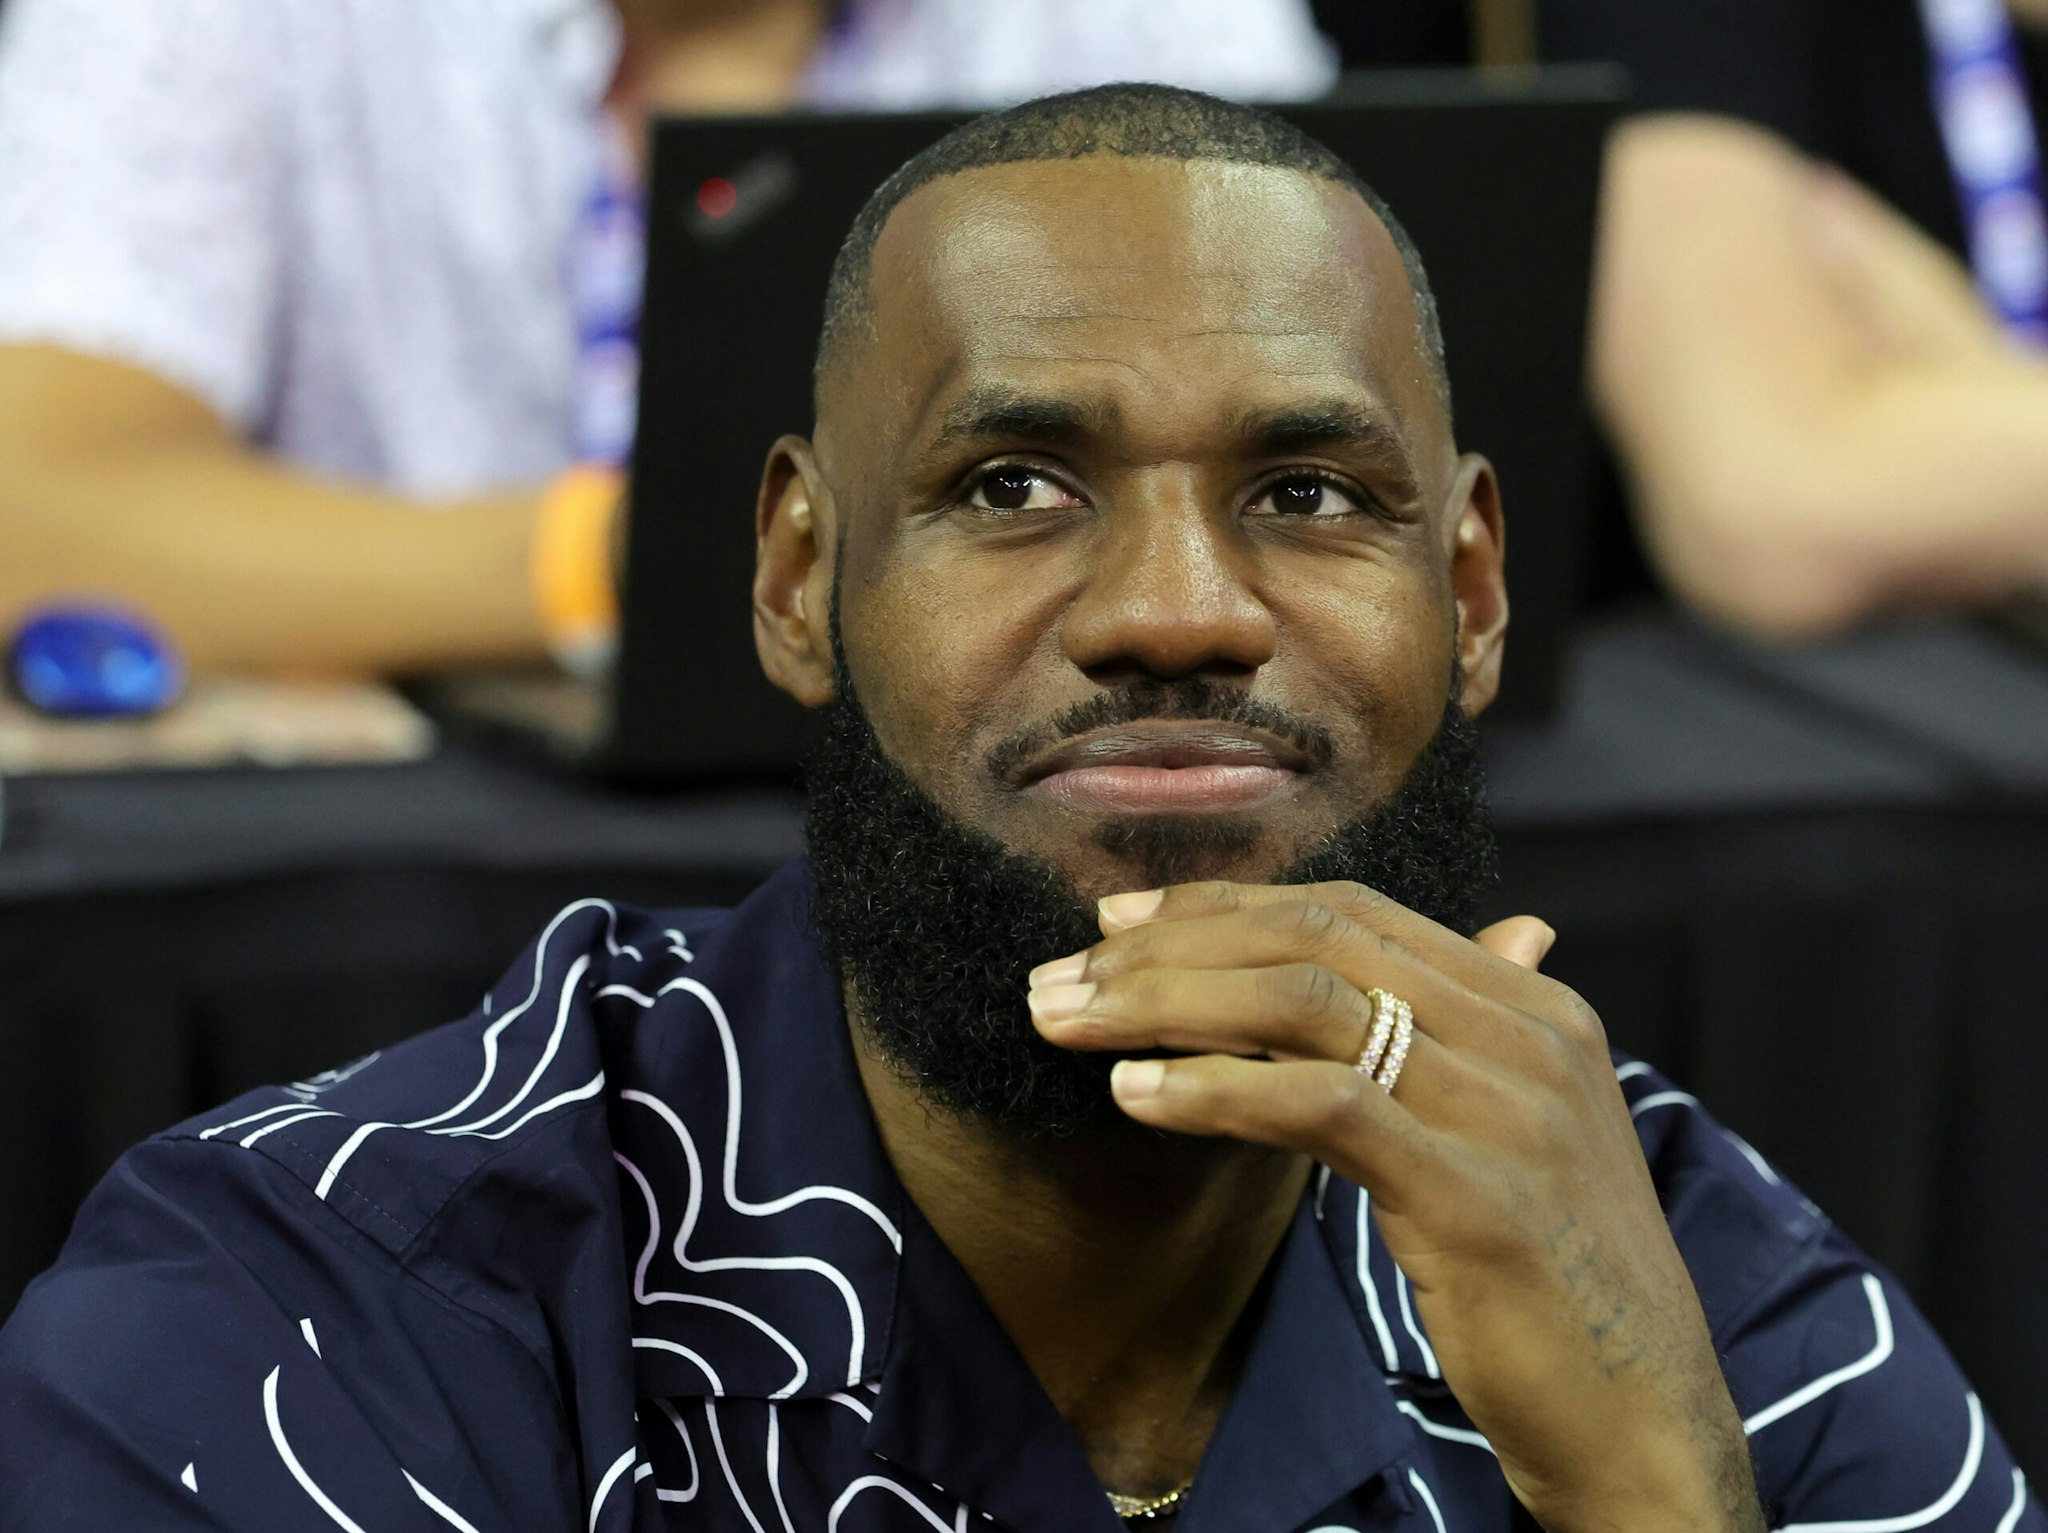 NBA superstar LeBron James says if he were detained in Russia like Brittney Griner, he wouldn't even want to come home